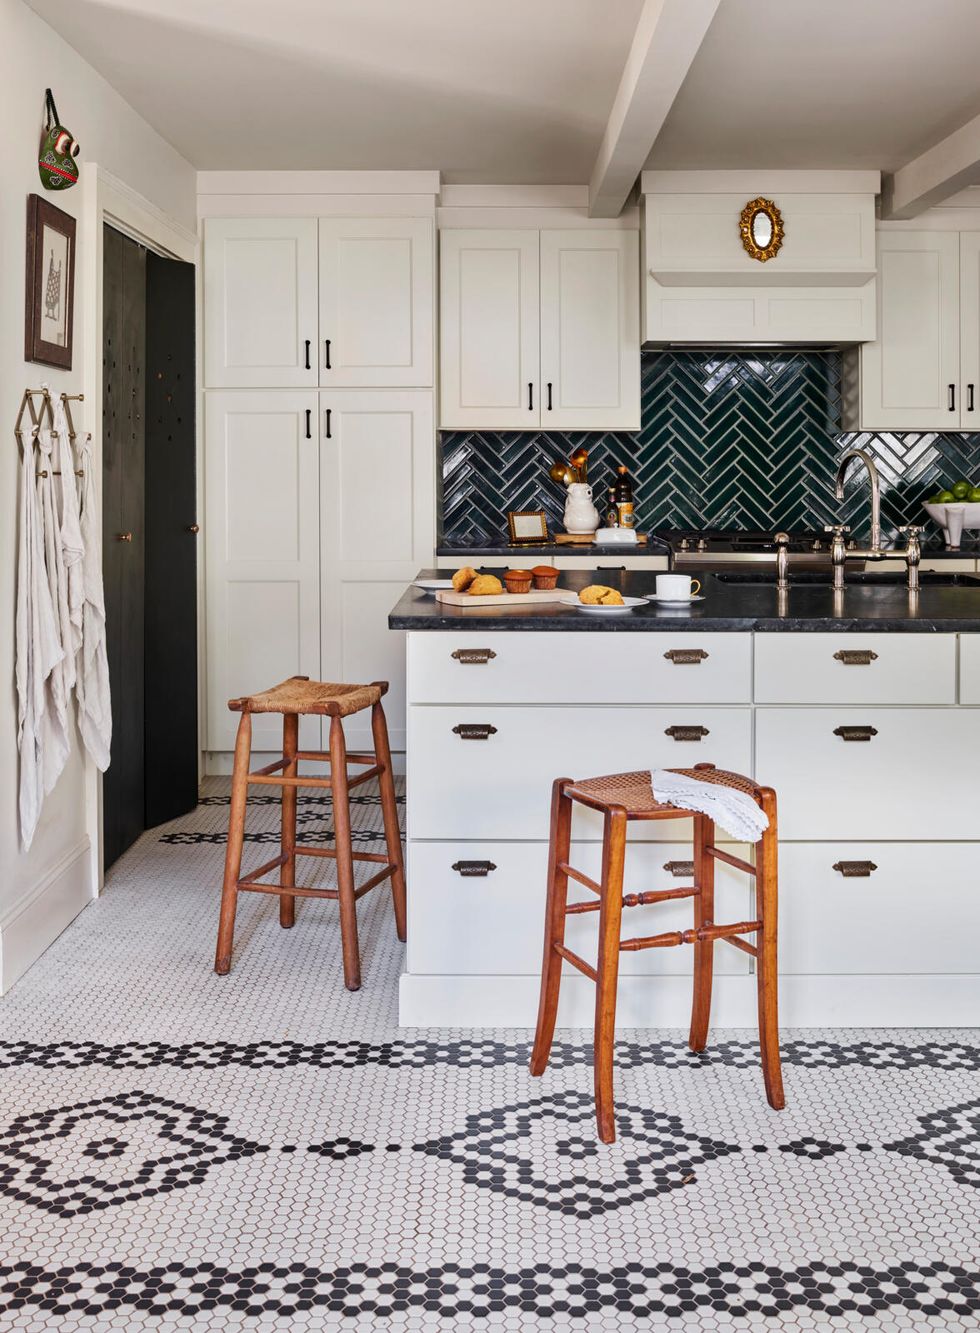 kitchen with black and white tiles floor and backsplash